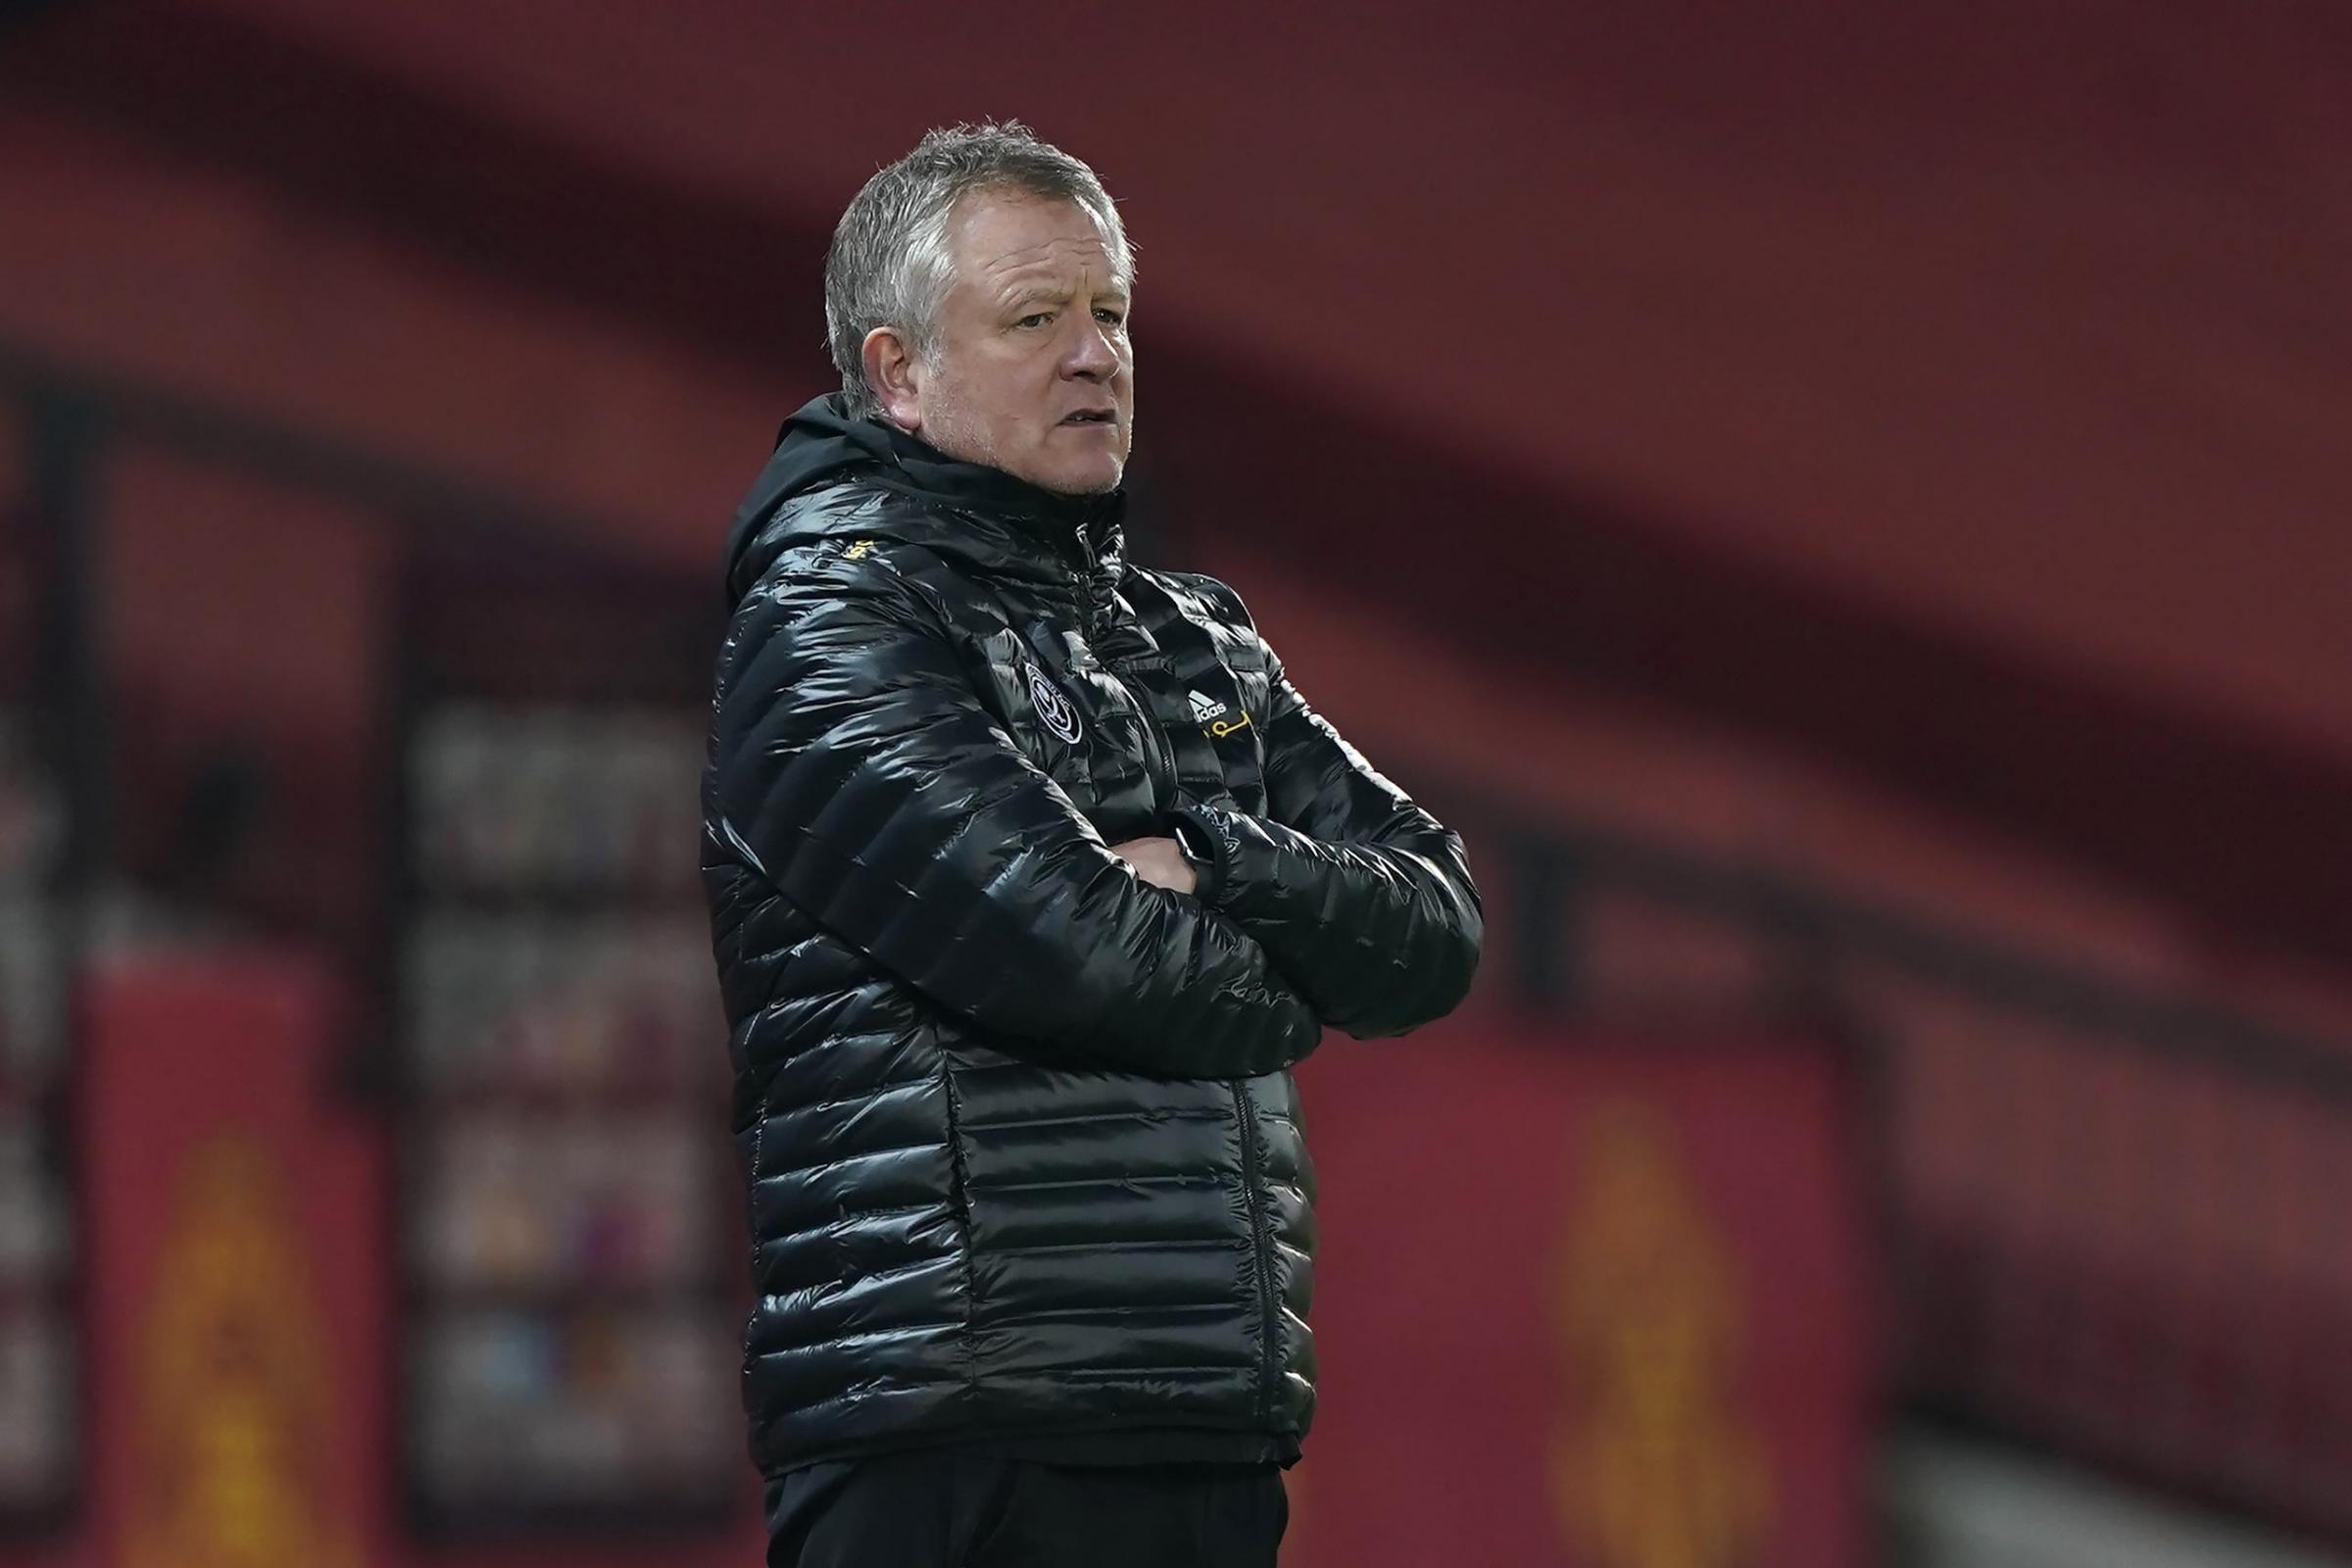 Chris Wilder has been confirmed as the new Middlesbrough manager